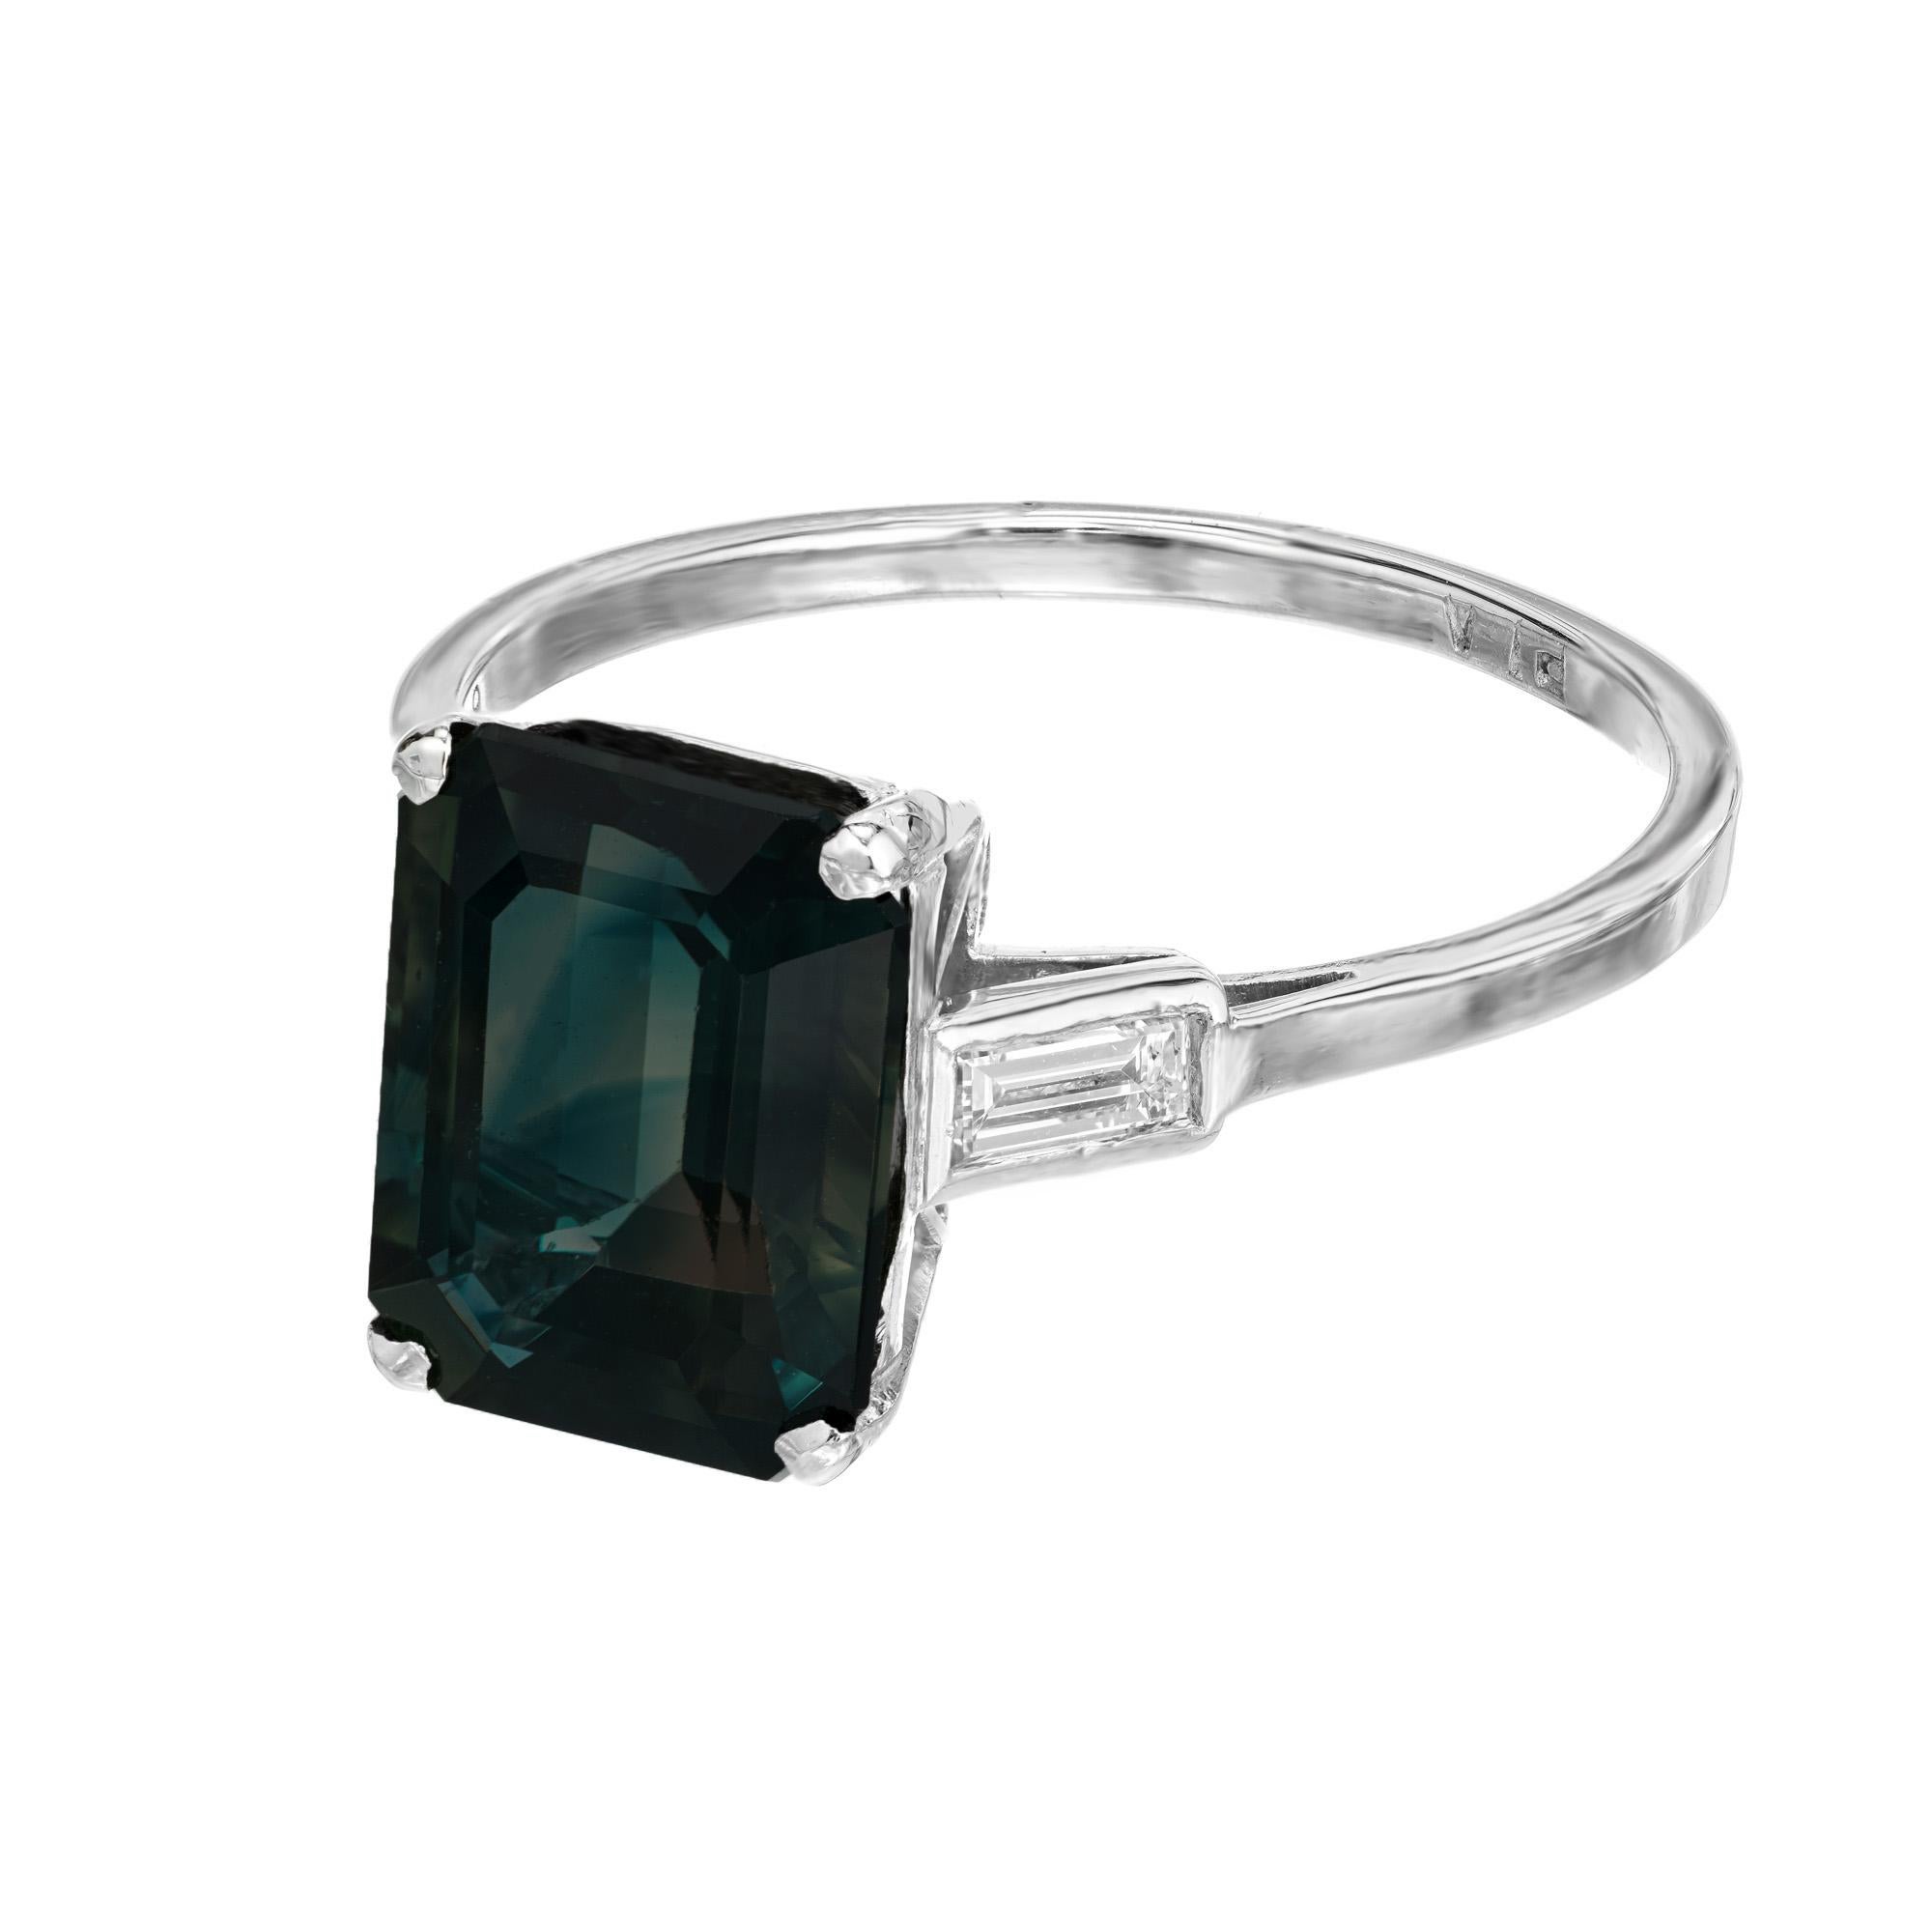 1940's Art Deco green sapphire and diamond engagement ring. GIA certified octagon shape 5.37ct rich green sapphire mounted in platinum three-stone setting with 2 straight baguette accent diamonds. This beautiful sapphire is graded by the GIA as